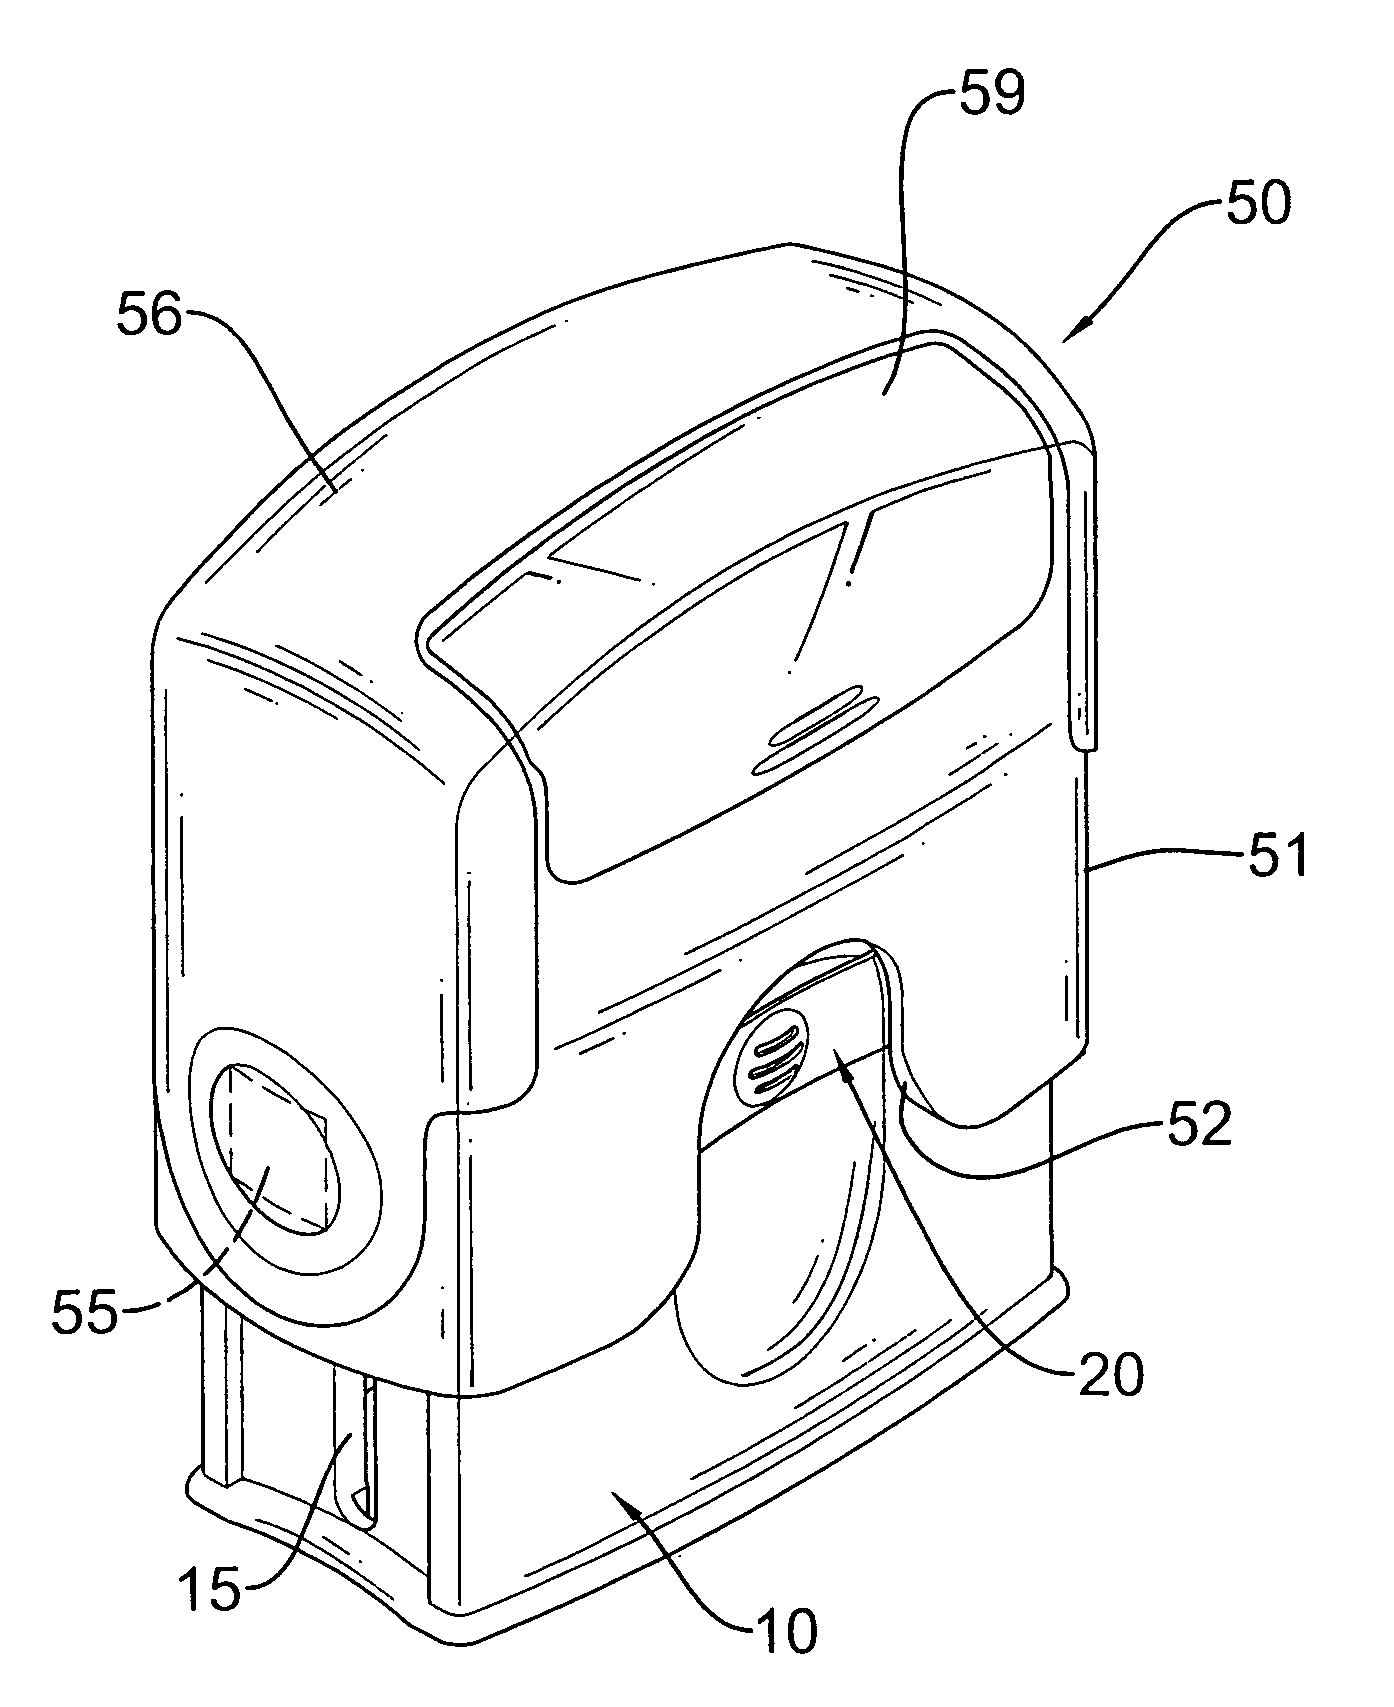 Housing assembly for a self-inking stamp